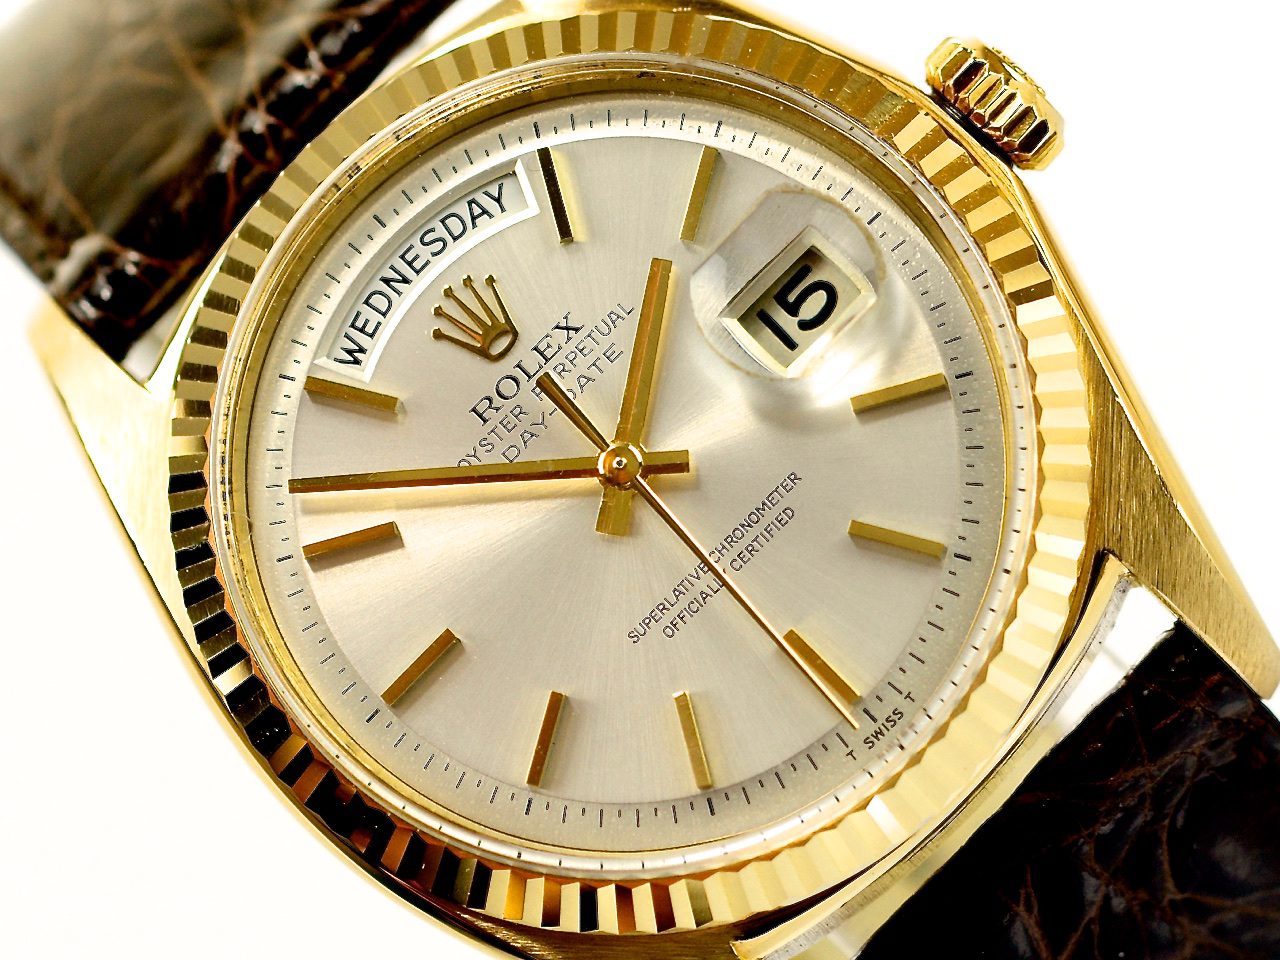 rolex oyster perpetual day date old